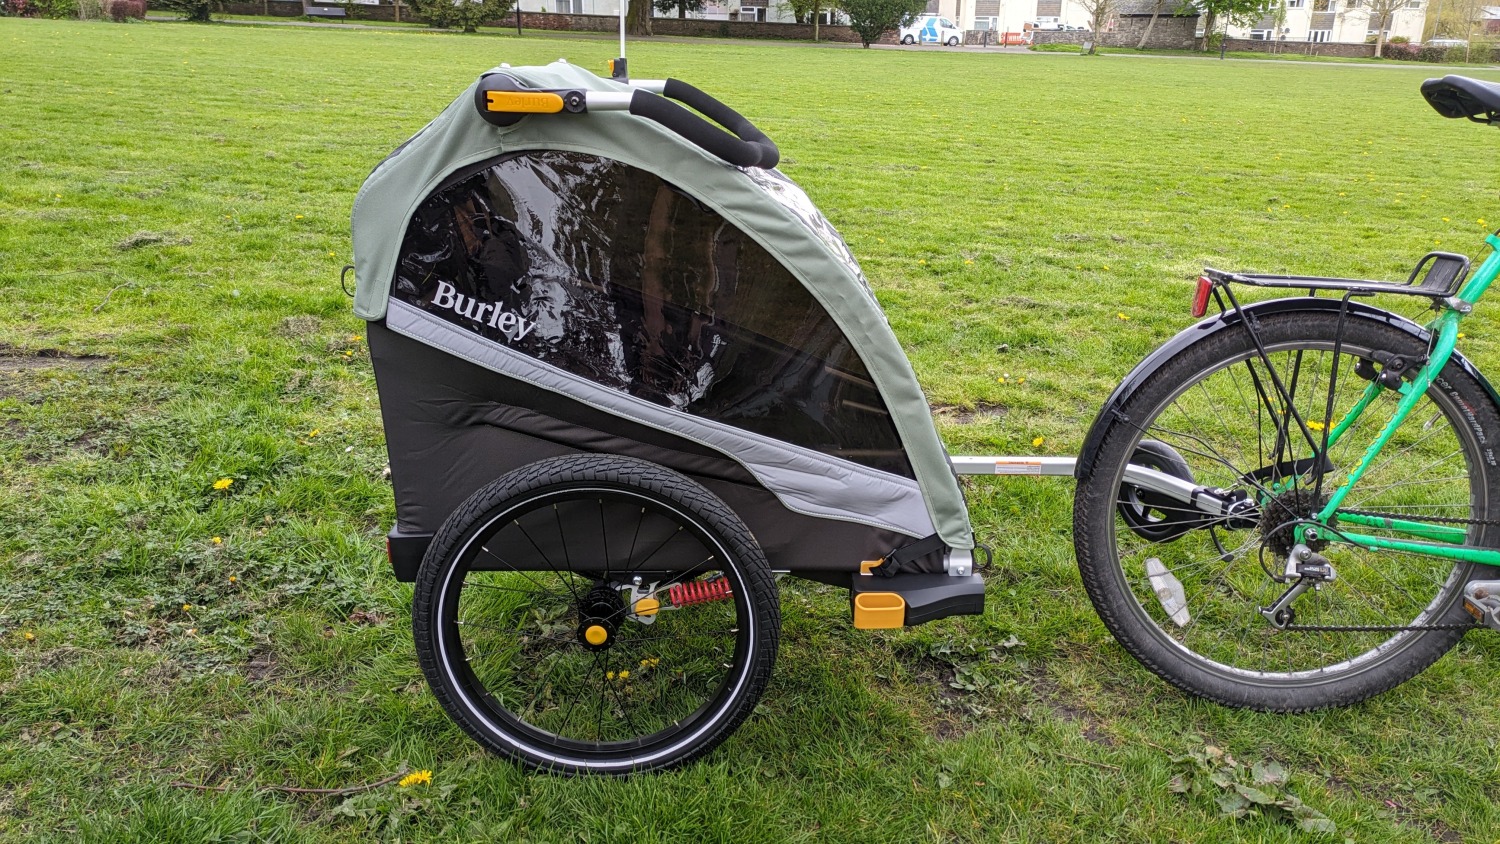 Picture showing the Burley D'Lite X child trailer